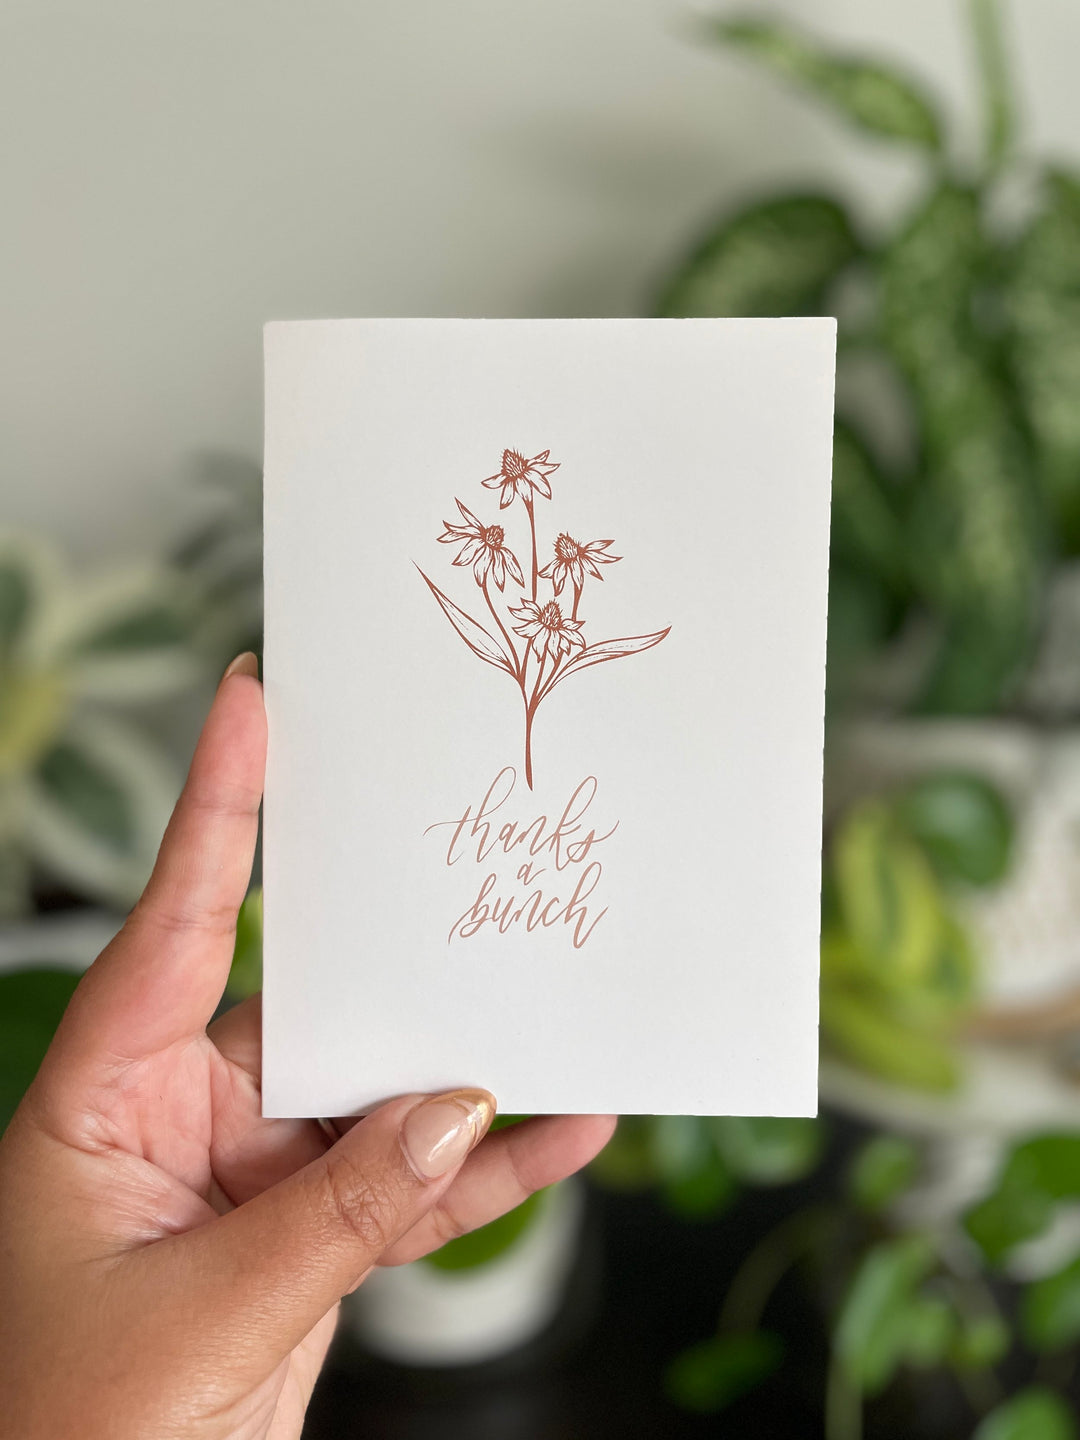 Crafted for those special moments deserving of a personal touch, this card serves as a beautiful canvas to express gratitude, love, or simply brighten someone's day with its charming illustration of a bundle of wildflowers and the lettered message "Thanks a bunch".